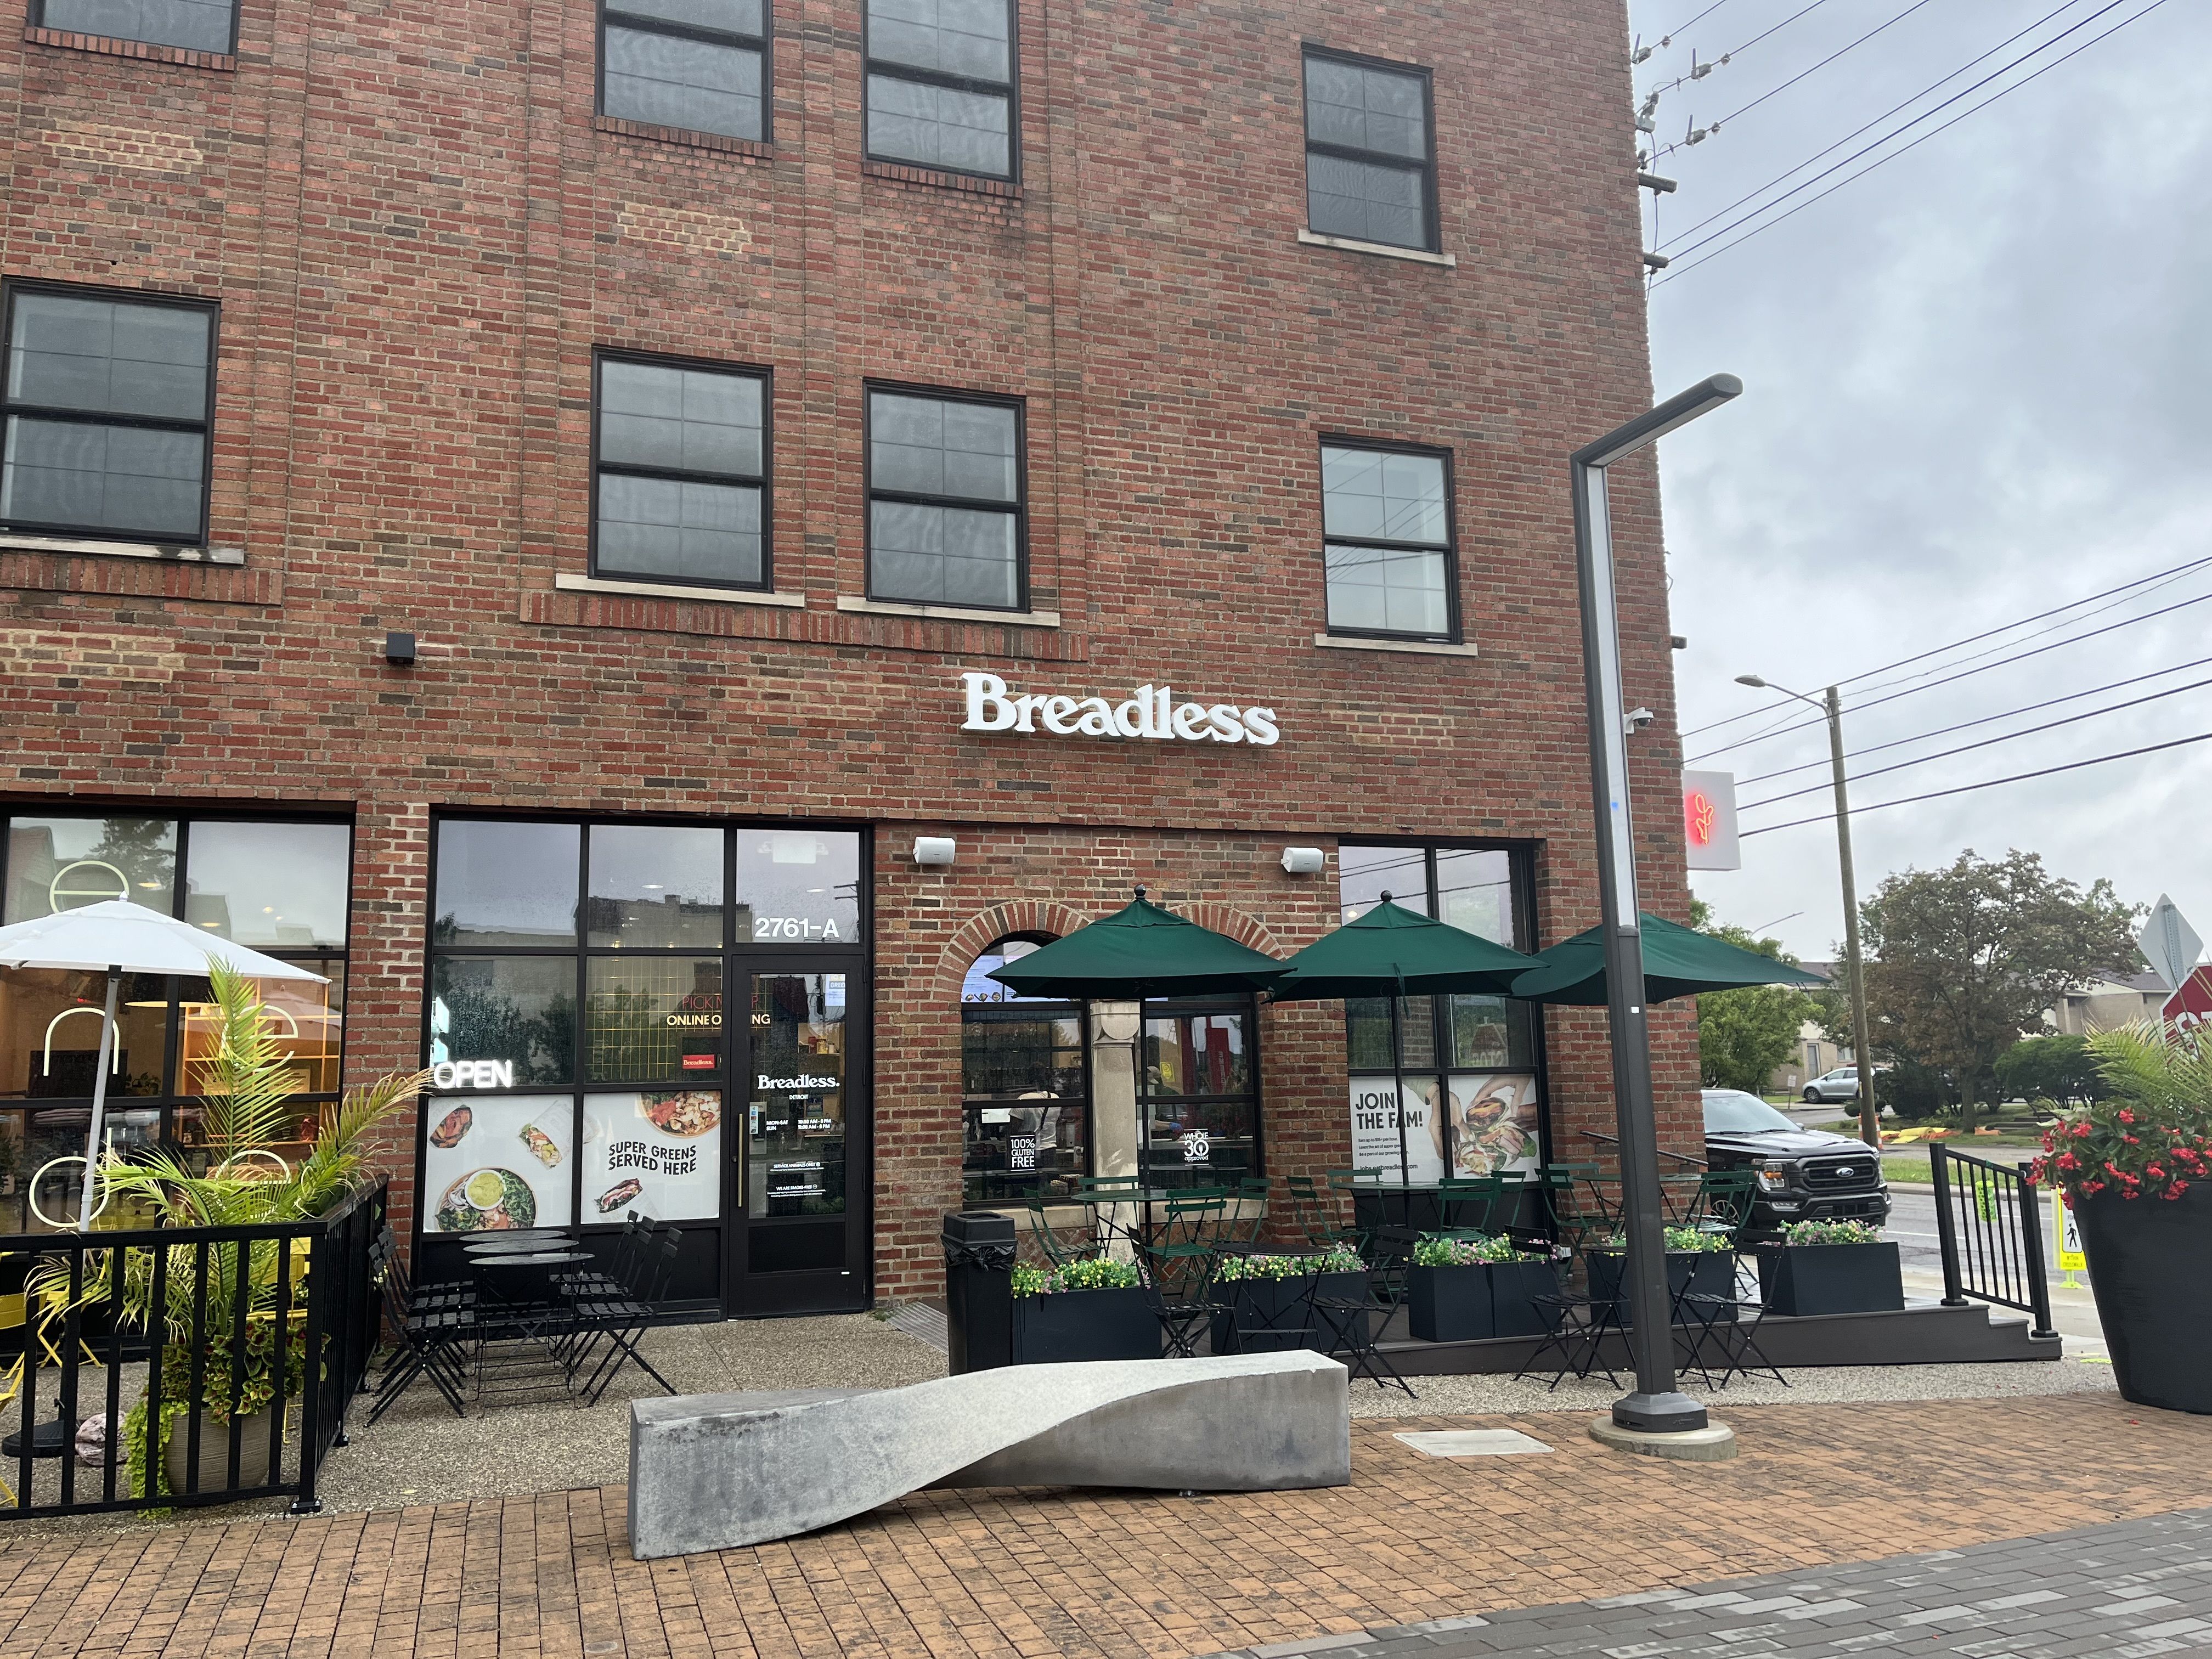 The brick frontage of Breadless, with umbrellas over outdoor seating in front.